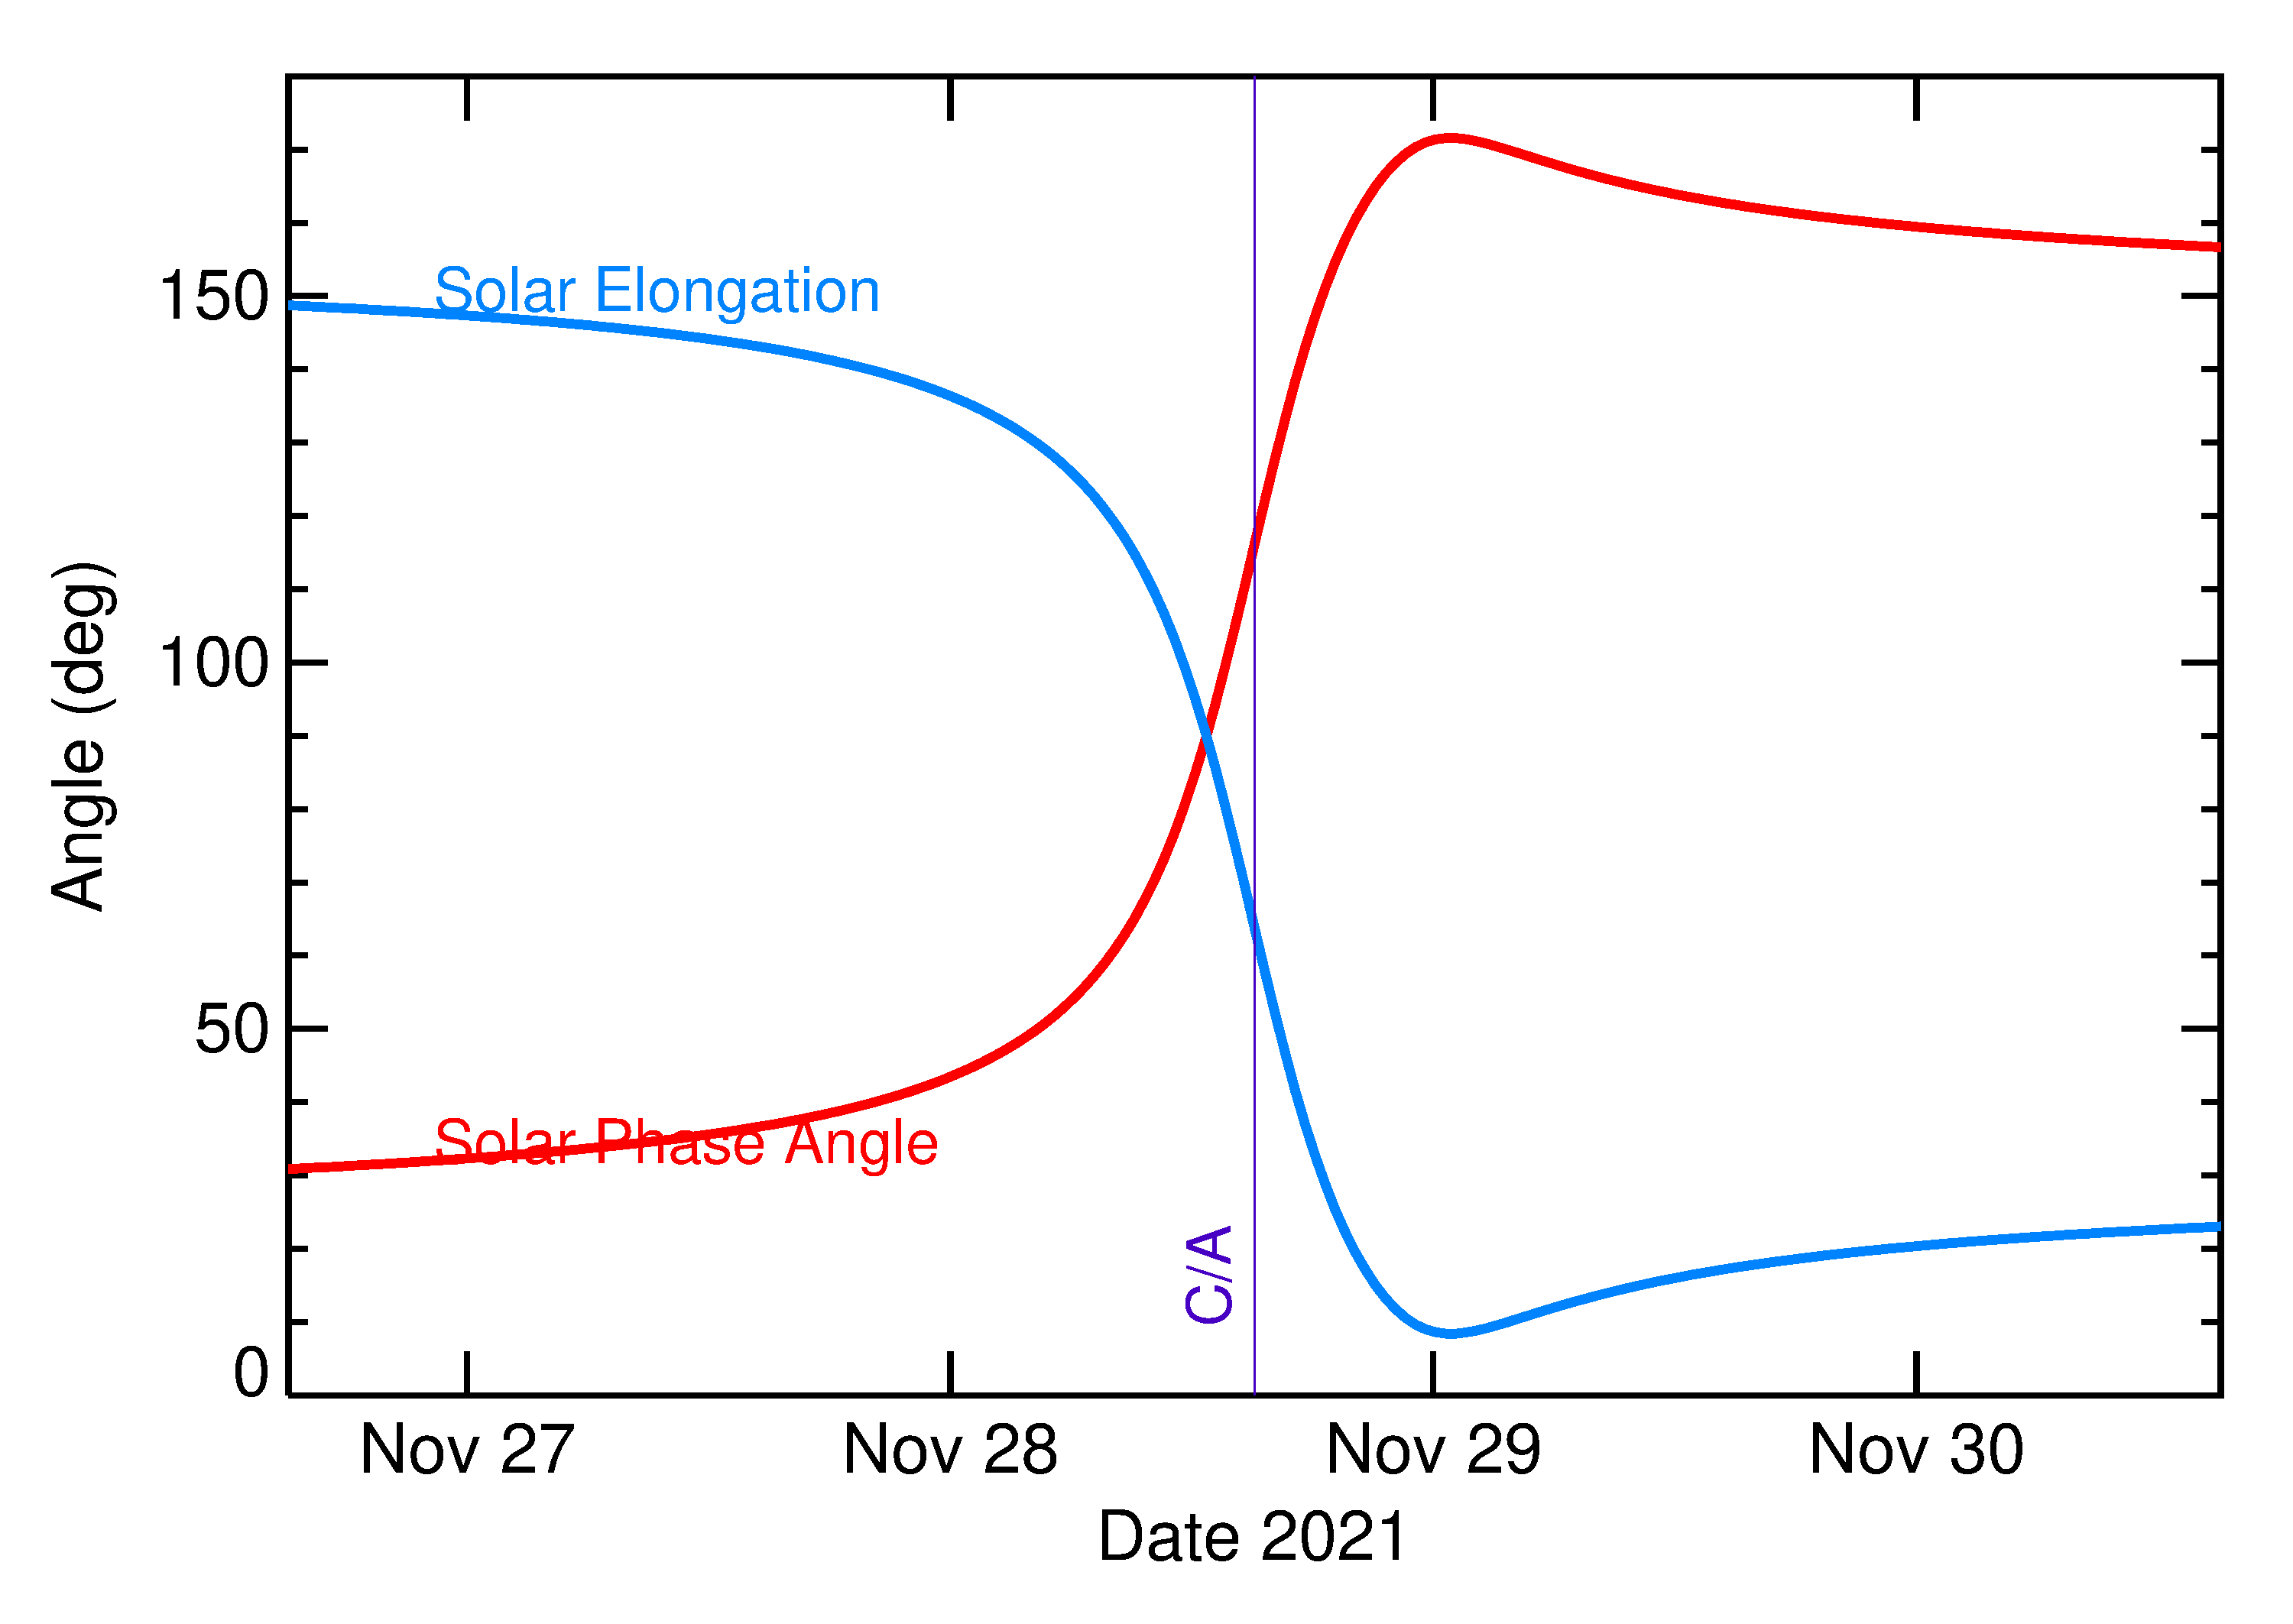 Solar Elongation and Solar Phase Angle of 2021 WC1 in the days around closest approach